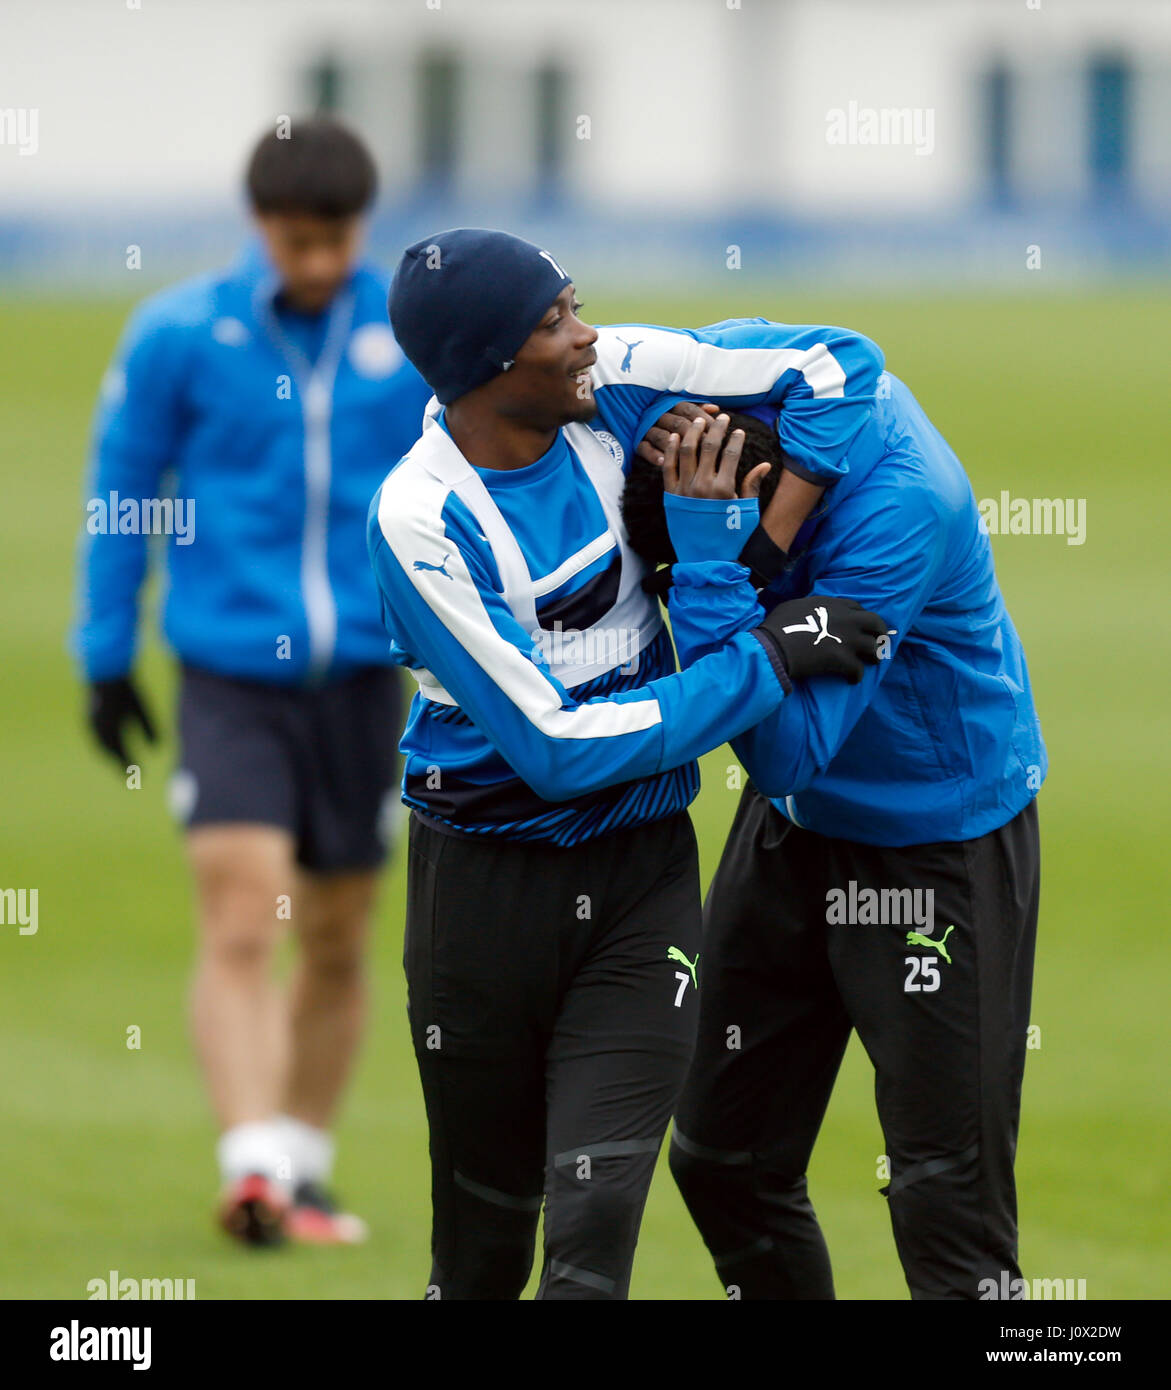 Leicester City's Ahmed Musa (left) shares a joke with Wilfred Ndidi during the training session at Belvoir Drive Training Ground, Leicester. Stock Photo